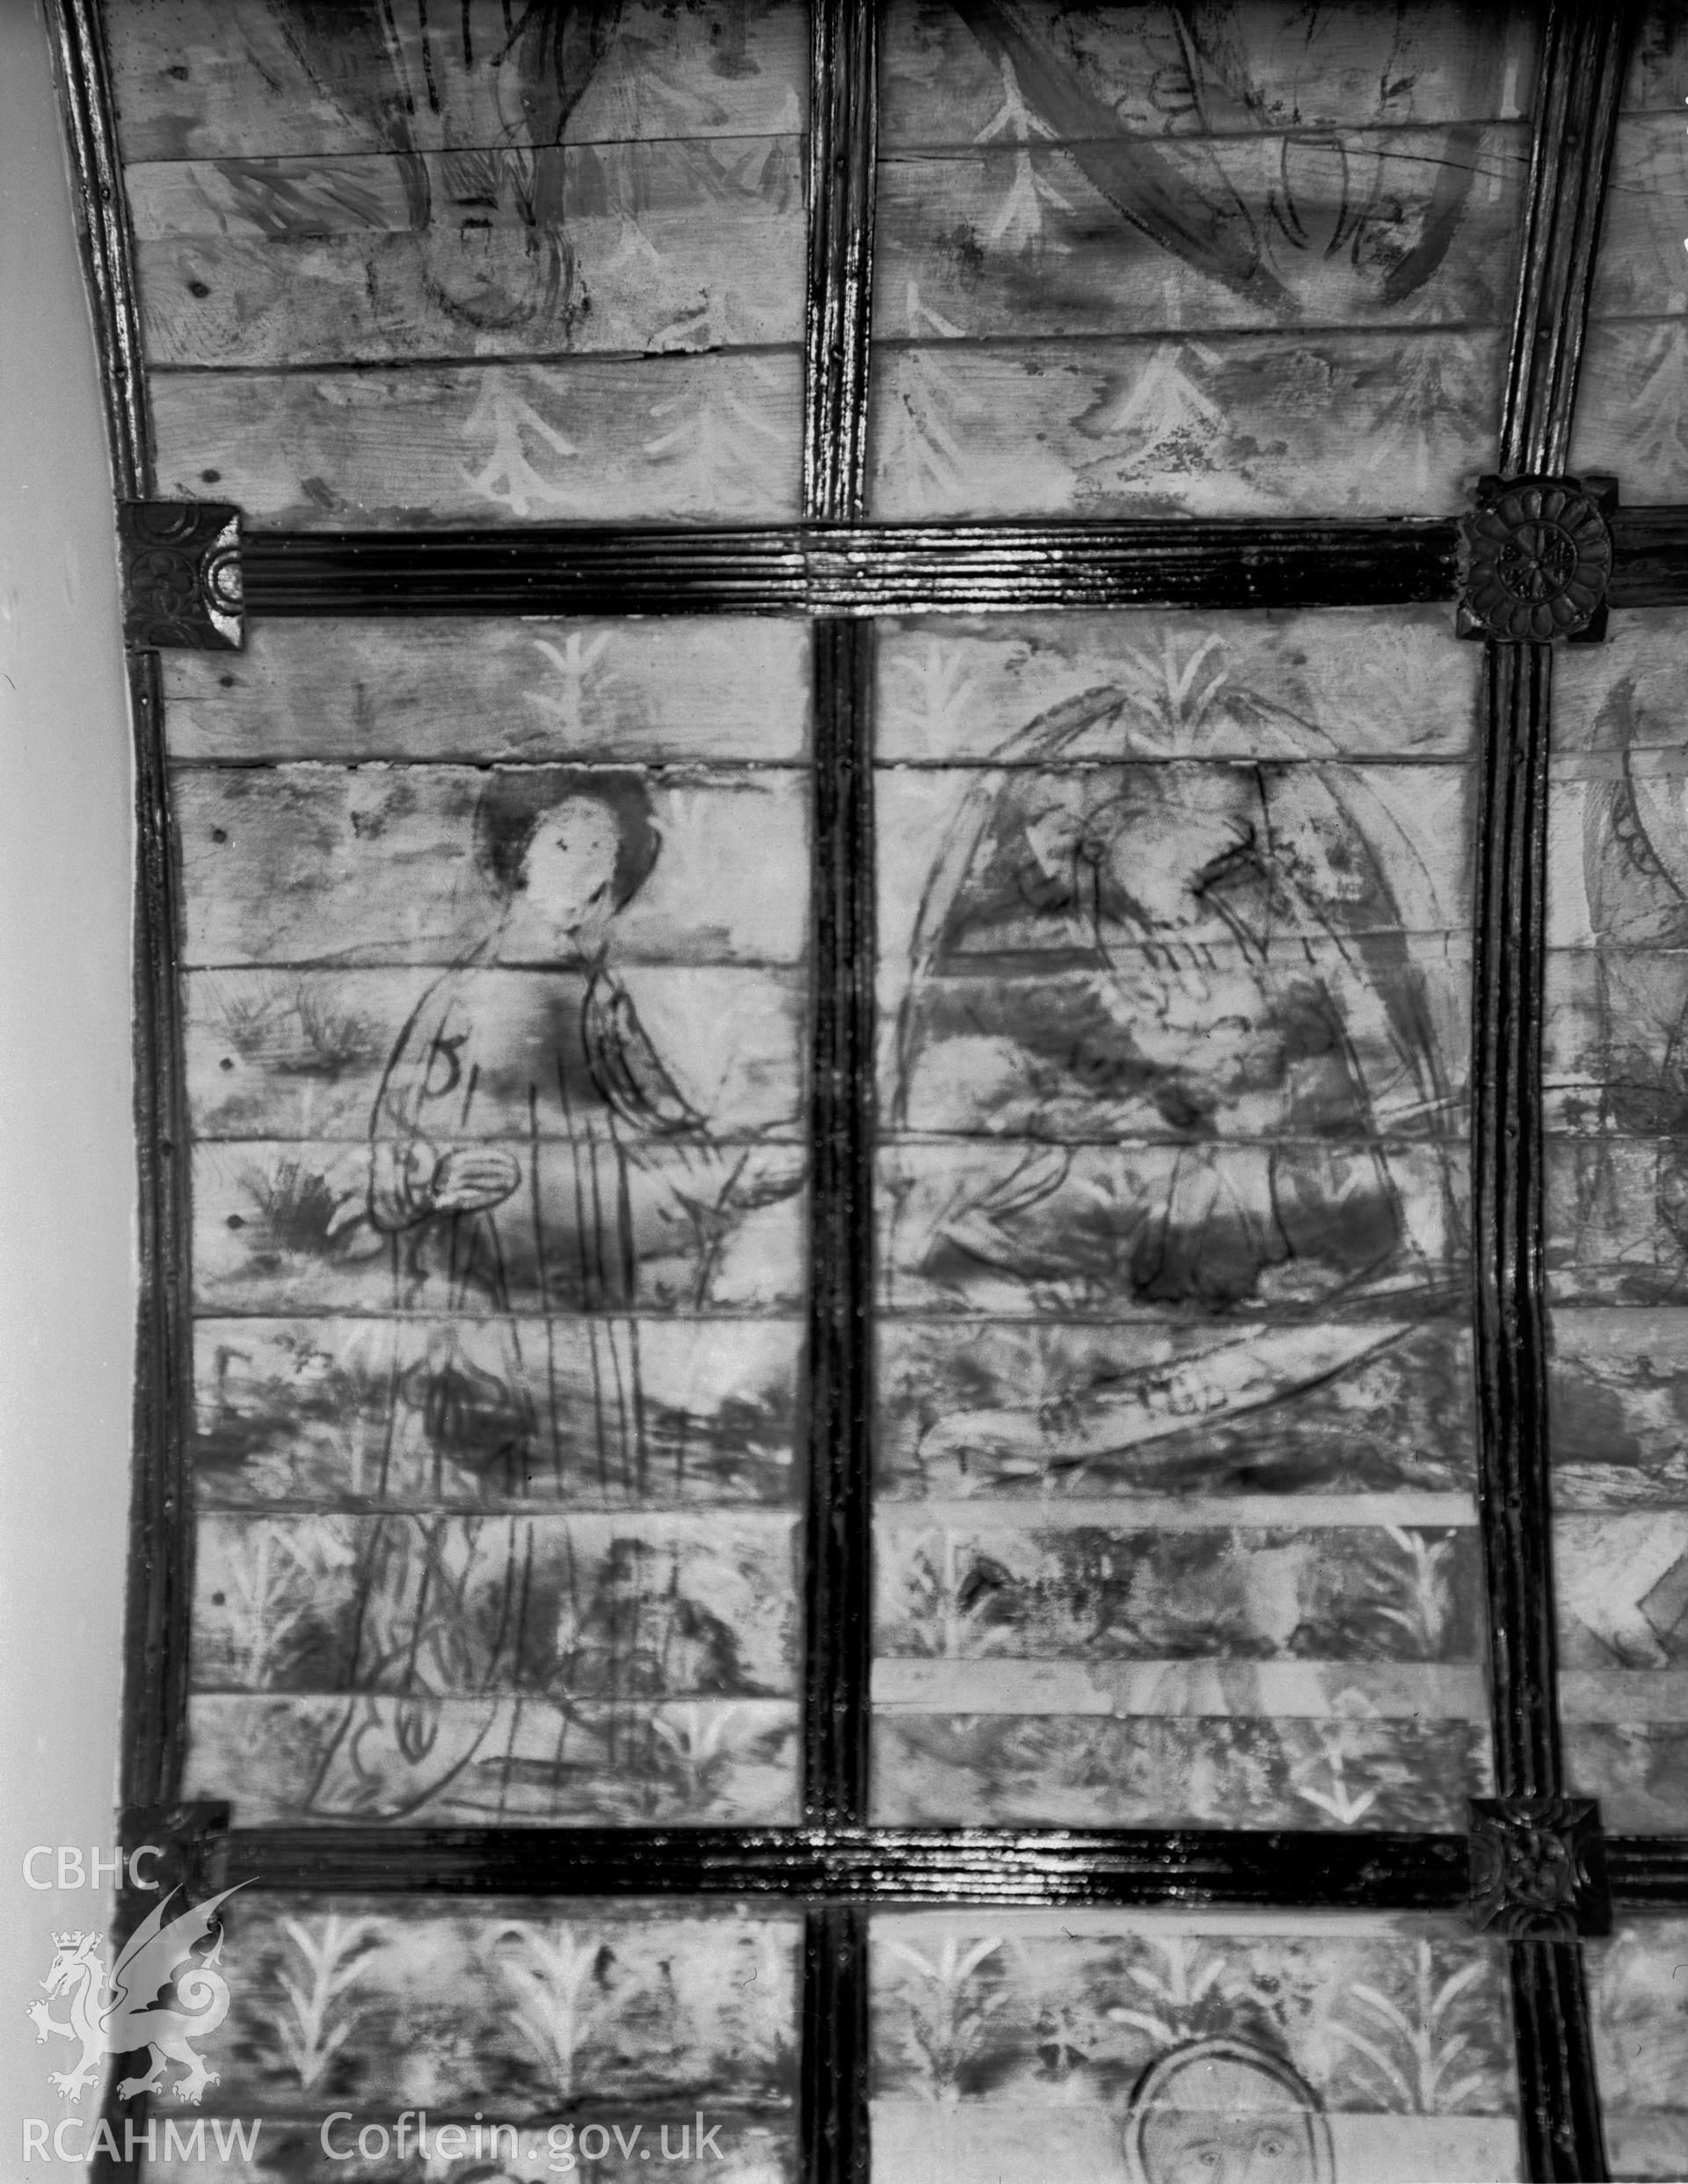 Interior view of St Benedicts Church, Gyffin showing ceiling paintings, taken 30.09.48.